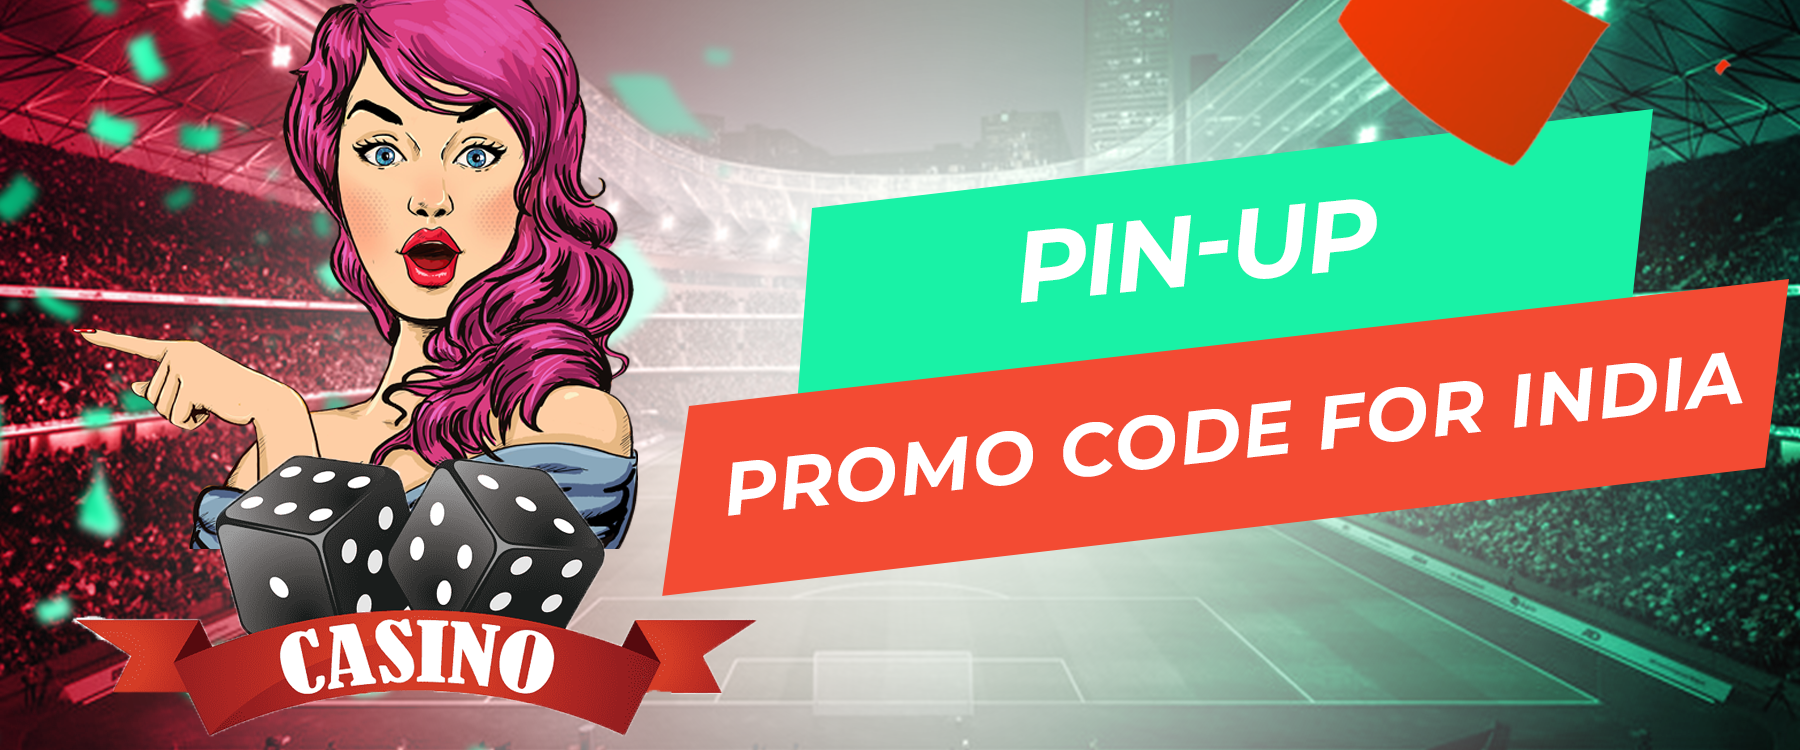 Pin Up Promo Code for India